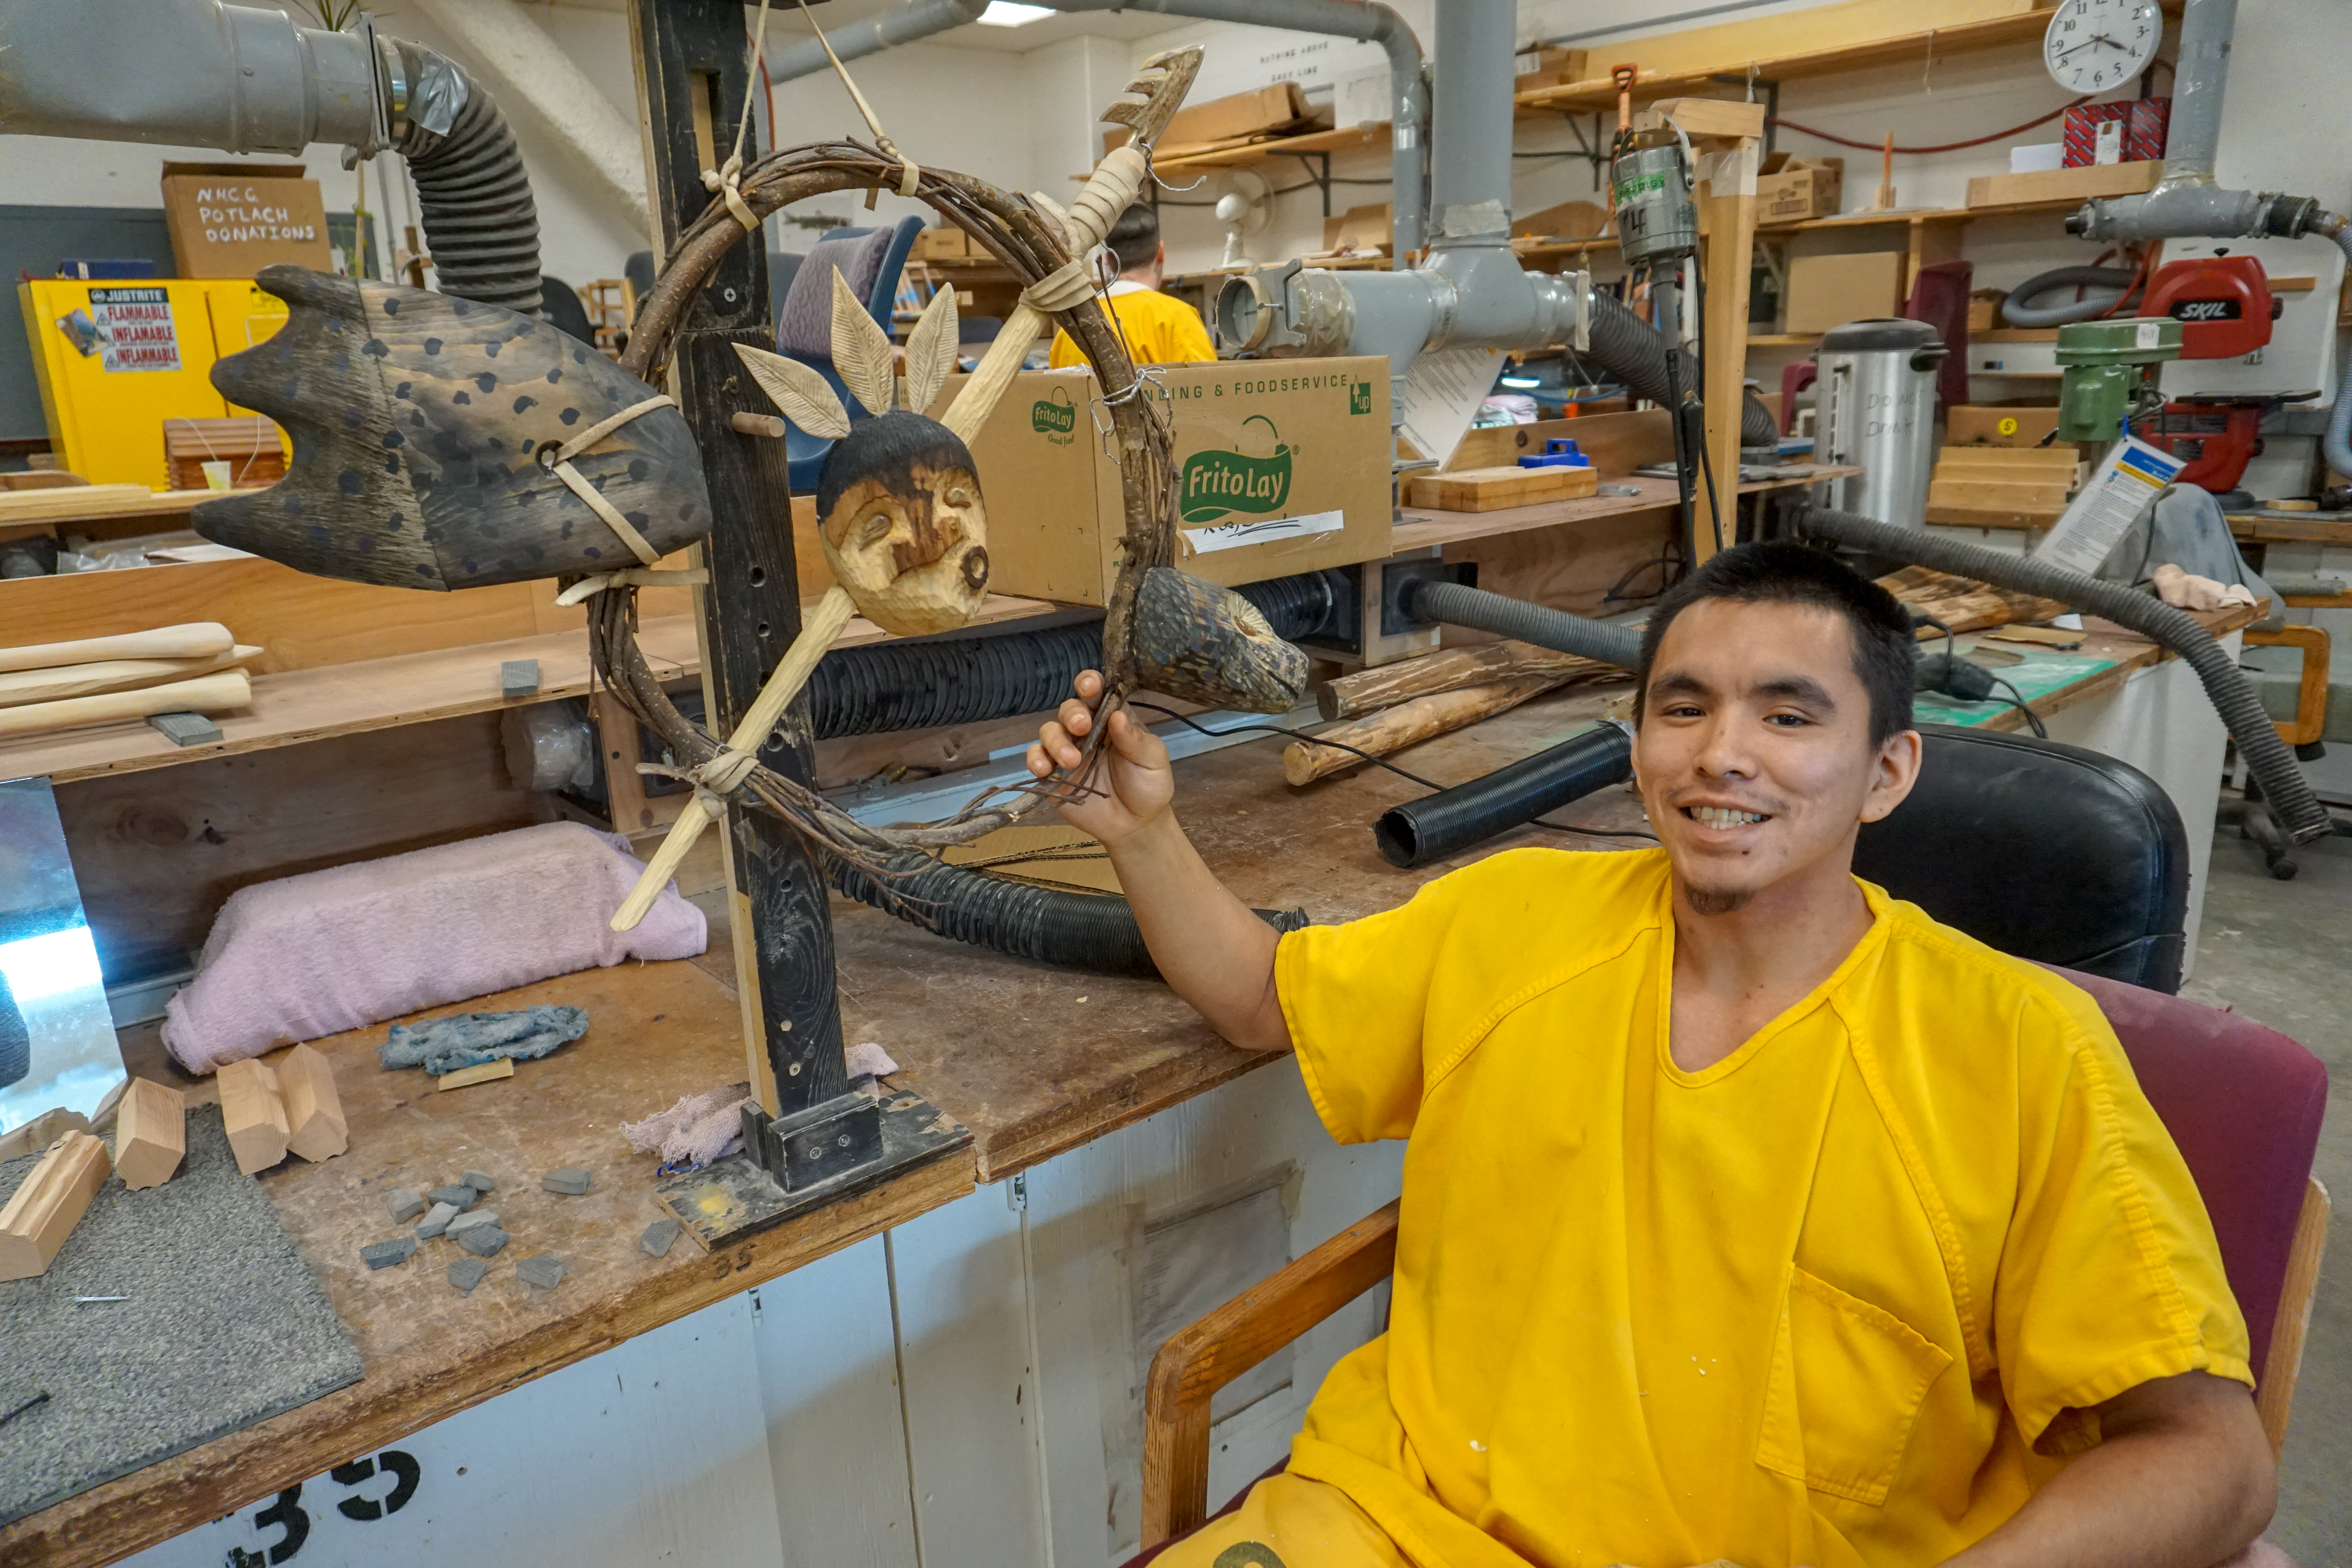 Nathanial Kangas shows off his first carving, a mask and a seal in the hobby shop at Spring Creek Correctional Center. (Photo by Anne Hillman/Alaska Public Media)